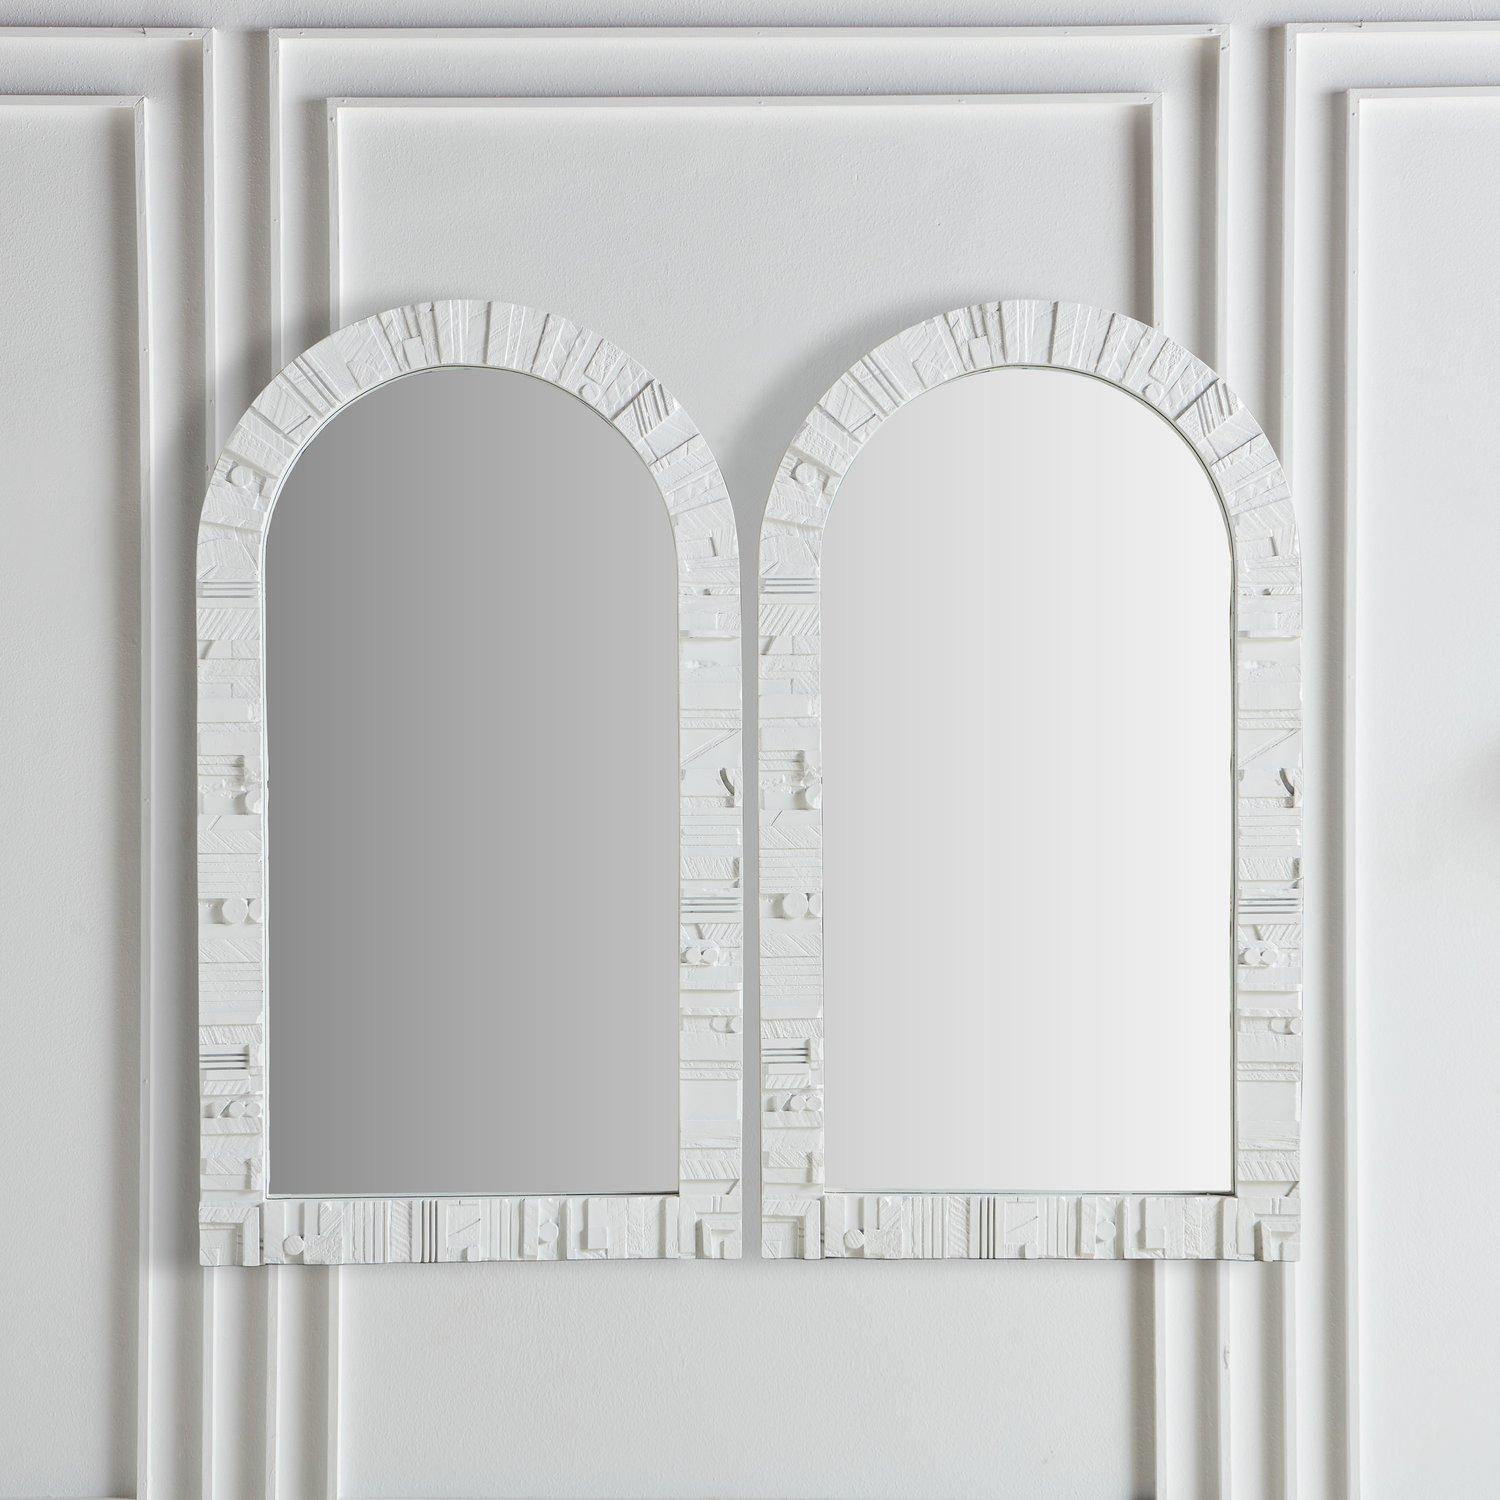 Mid-Century Modern Pair of White Wooden Framed Mirrors in the Style of Louise Nevelson